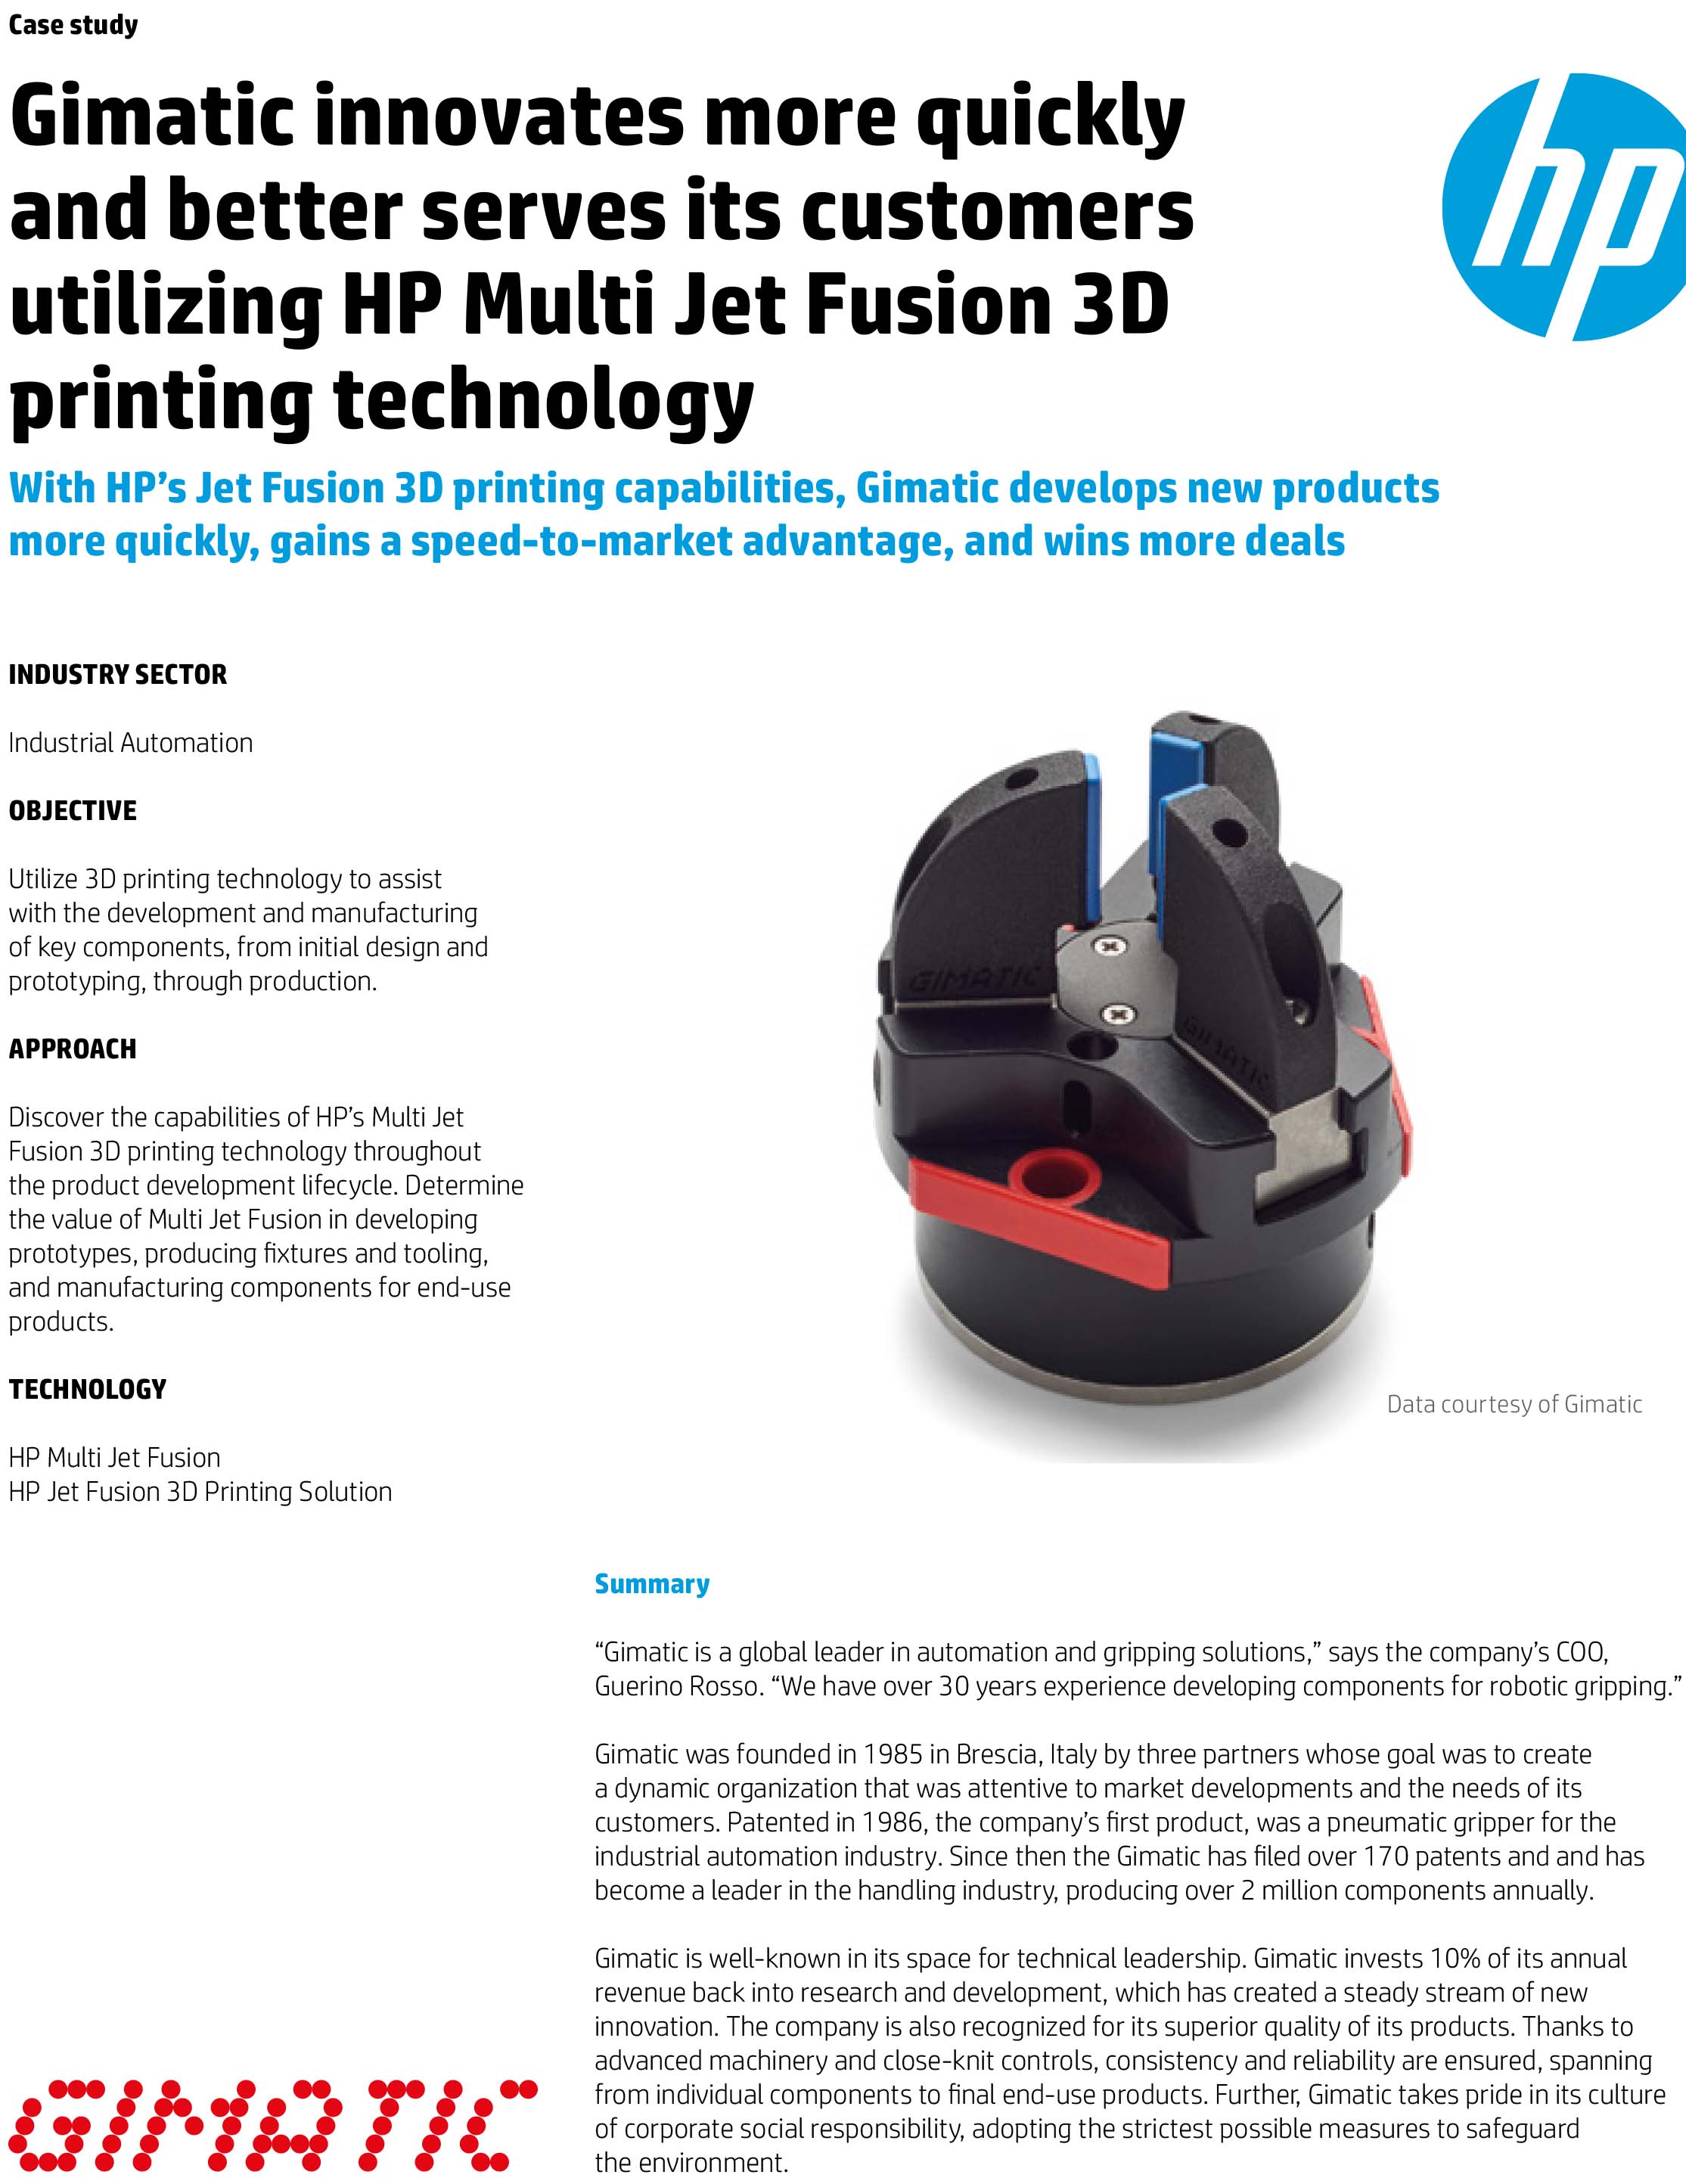 Gimatic innovates more quickly and better serves its customers utilizing HP Multi Jet Fusion 3D printing technology